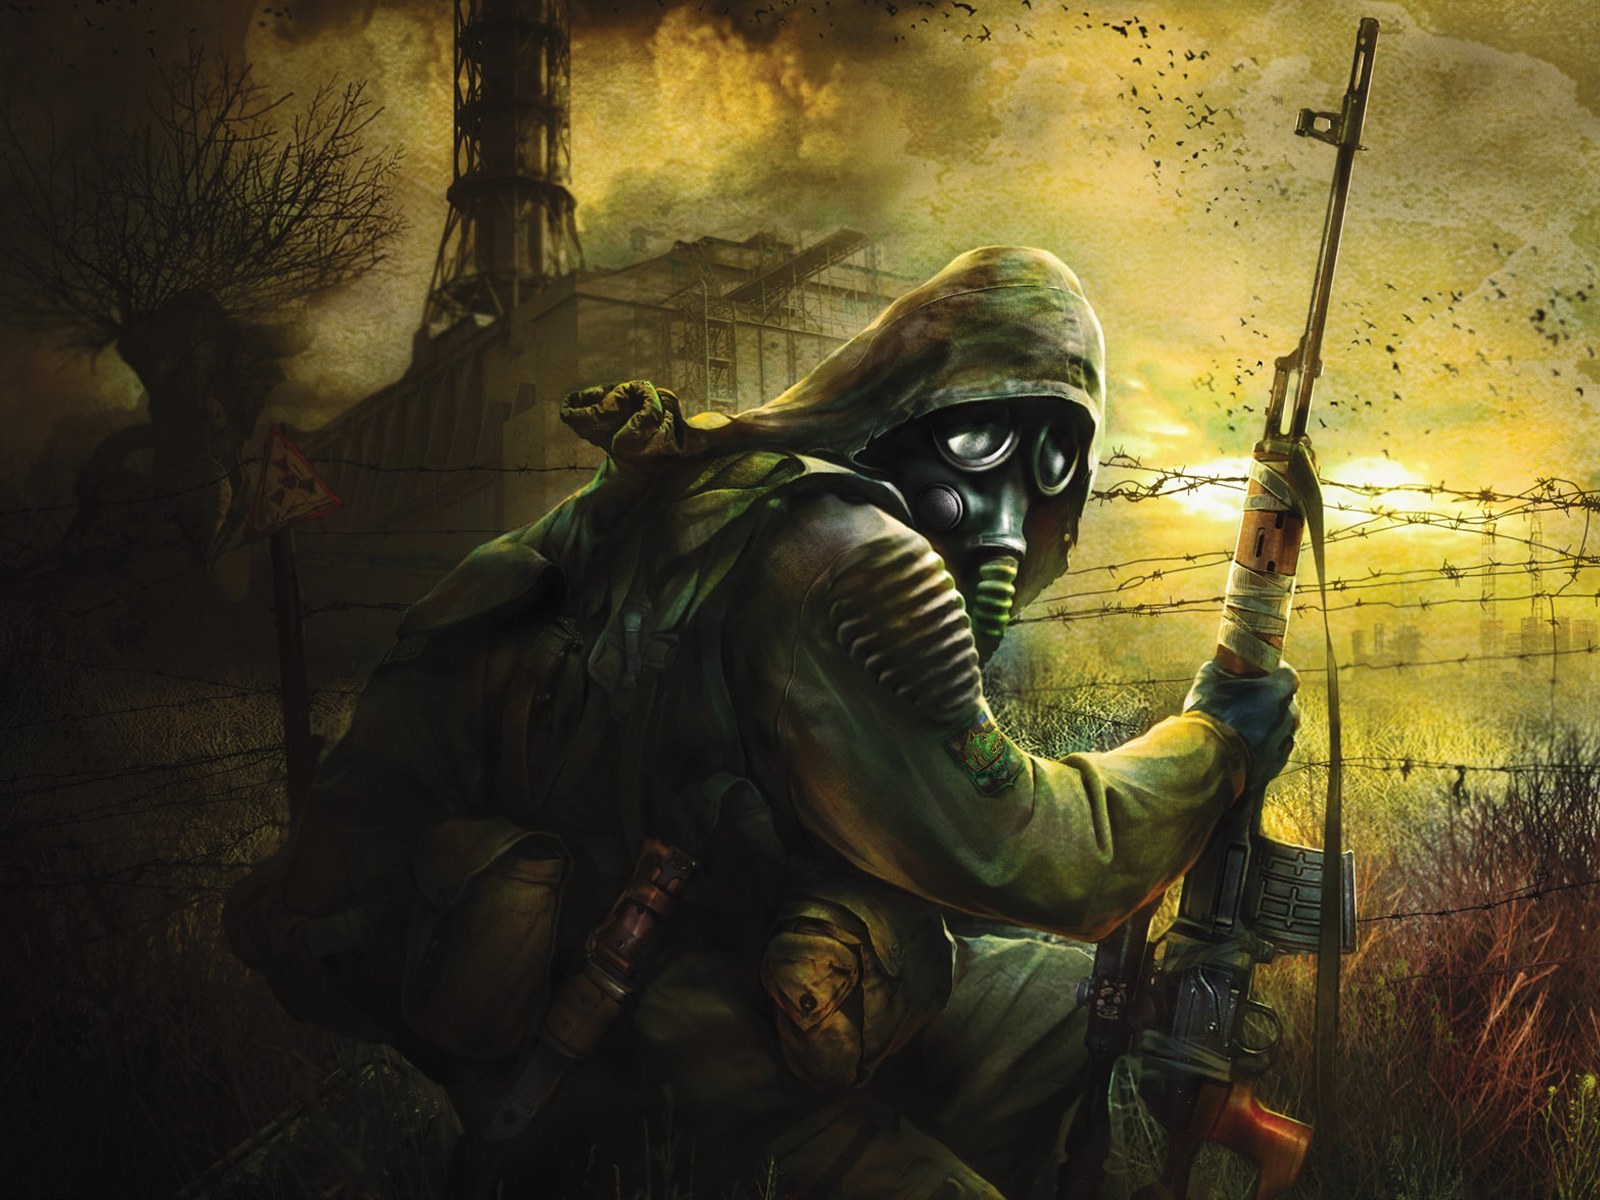 12001 download free Black wallpapers for computer, s.t.a.l.k.e.r., games Black pictures and backgrounds for desktop